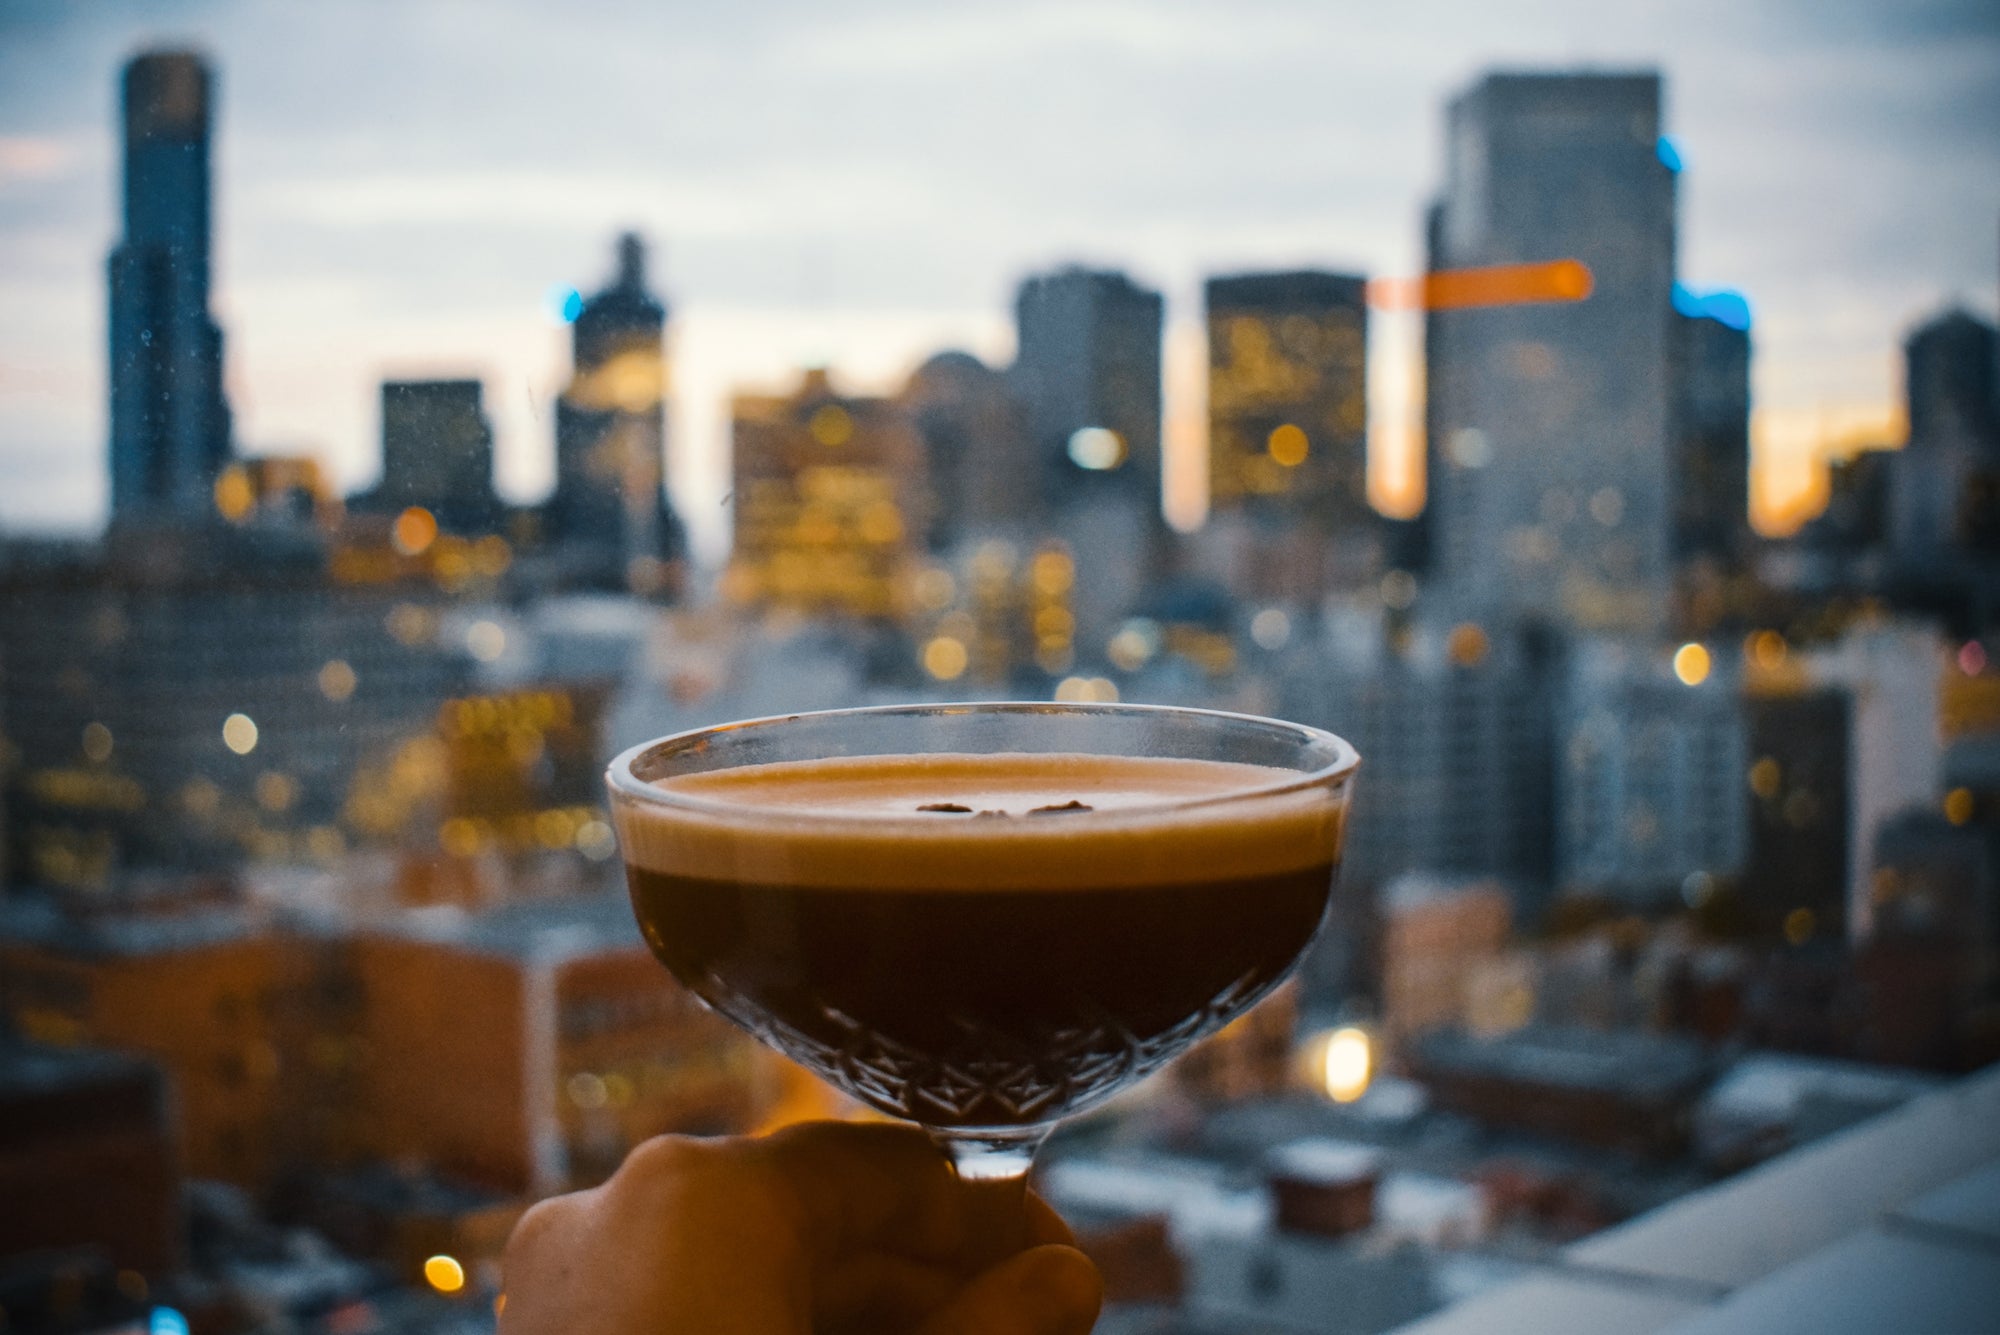 Espresso martini in foreground with a city scape in the background - Photo by Agathe on Unsplash 